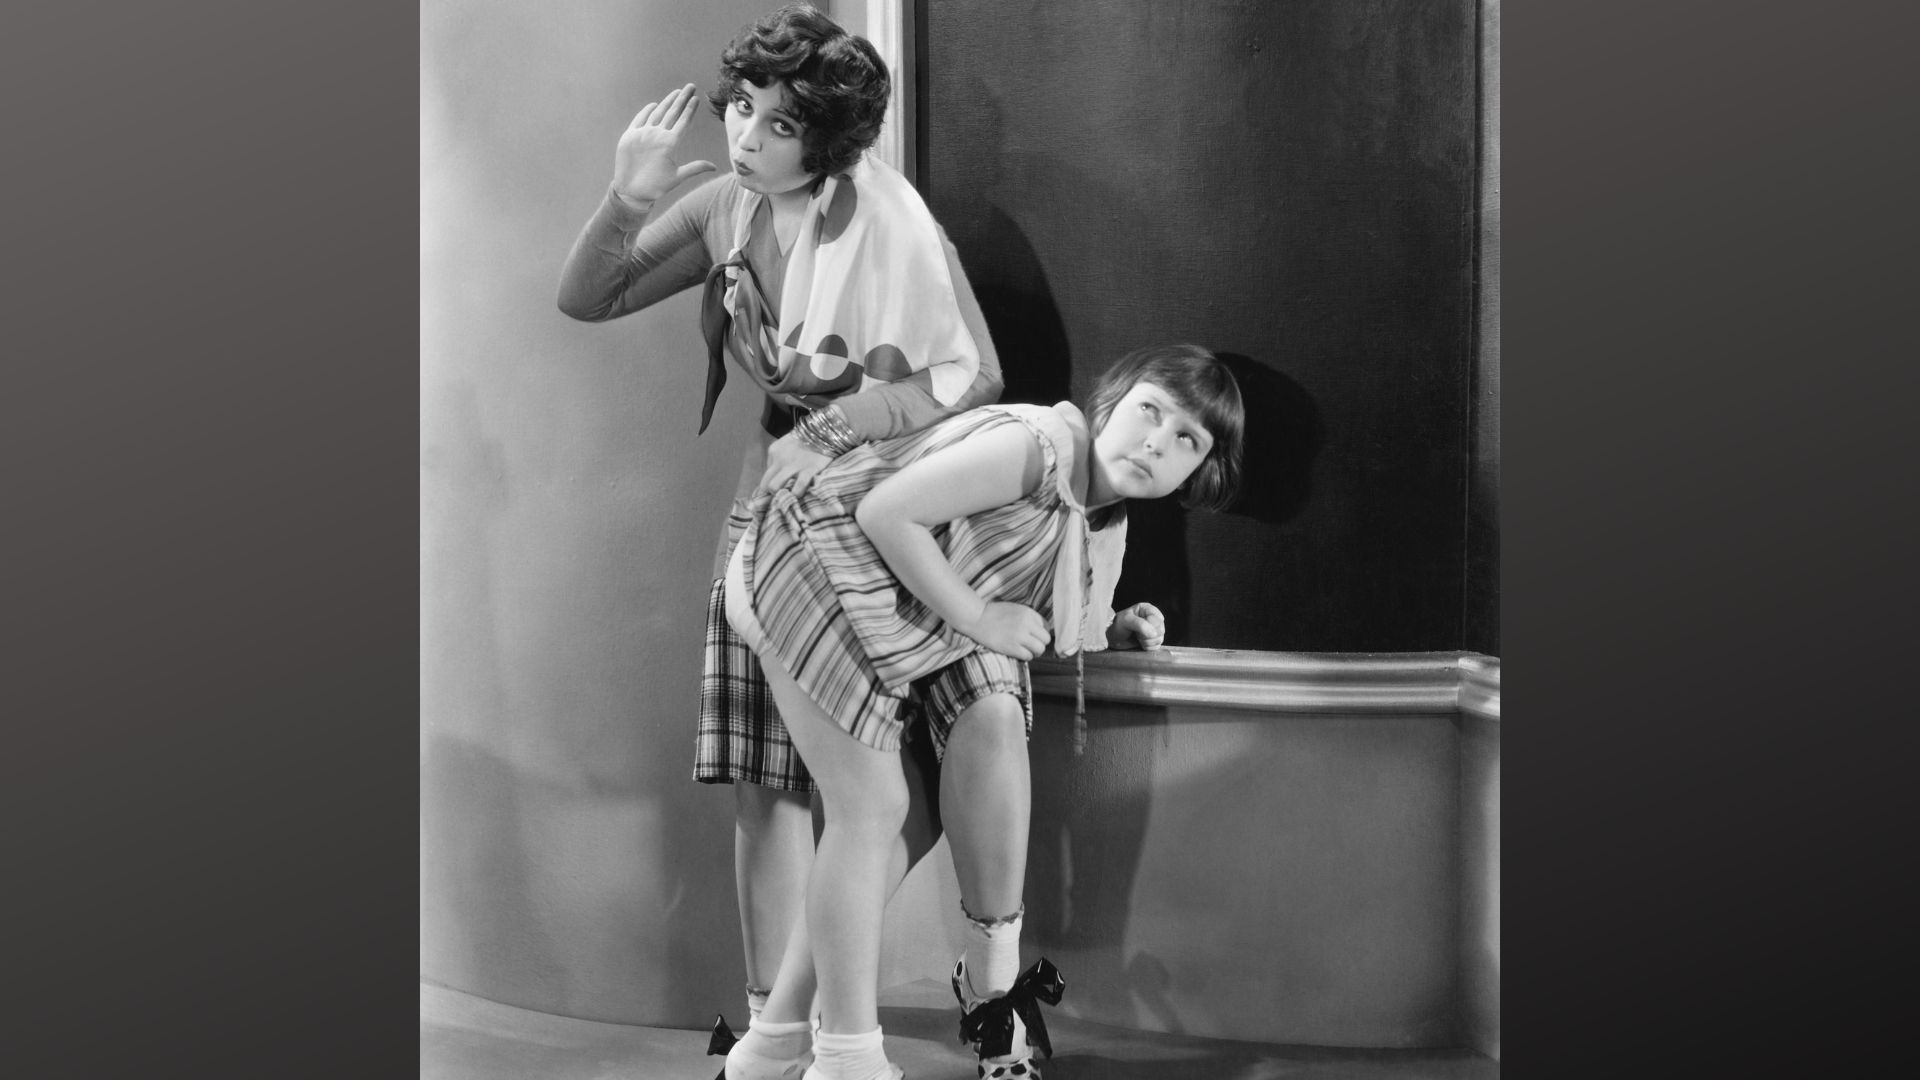 Spanking and the Rationalization Trap: How Some Parents Use Flimsy Excuses to Justify Physical Discipline